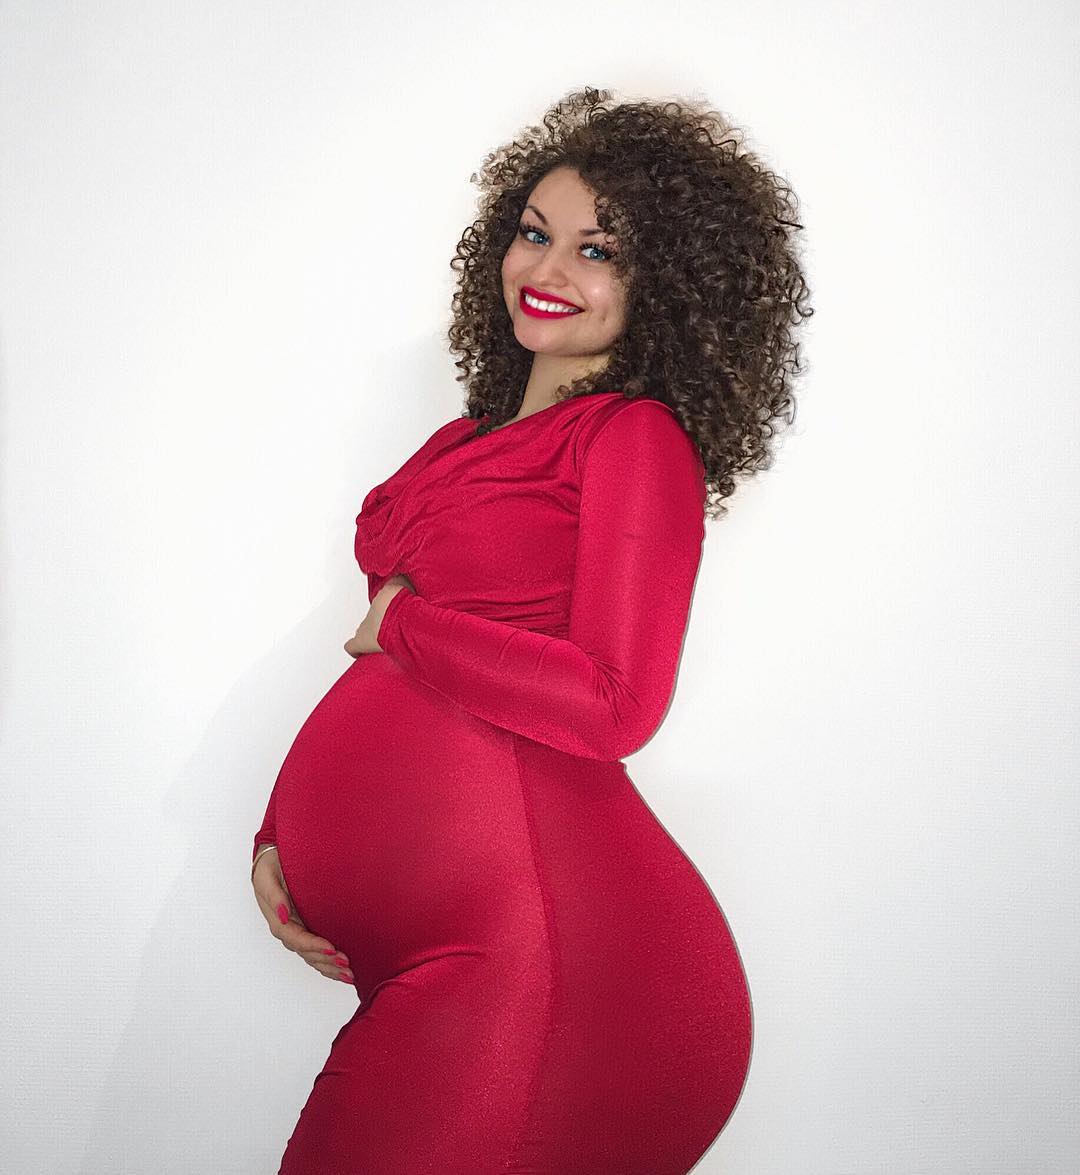 'She Carry Belle For Front & Back' - People React To Lady's Cute Maternity Photos